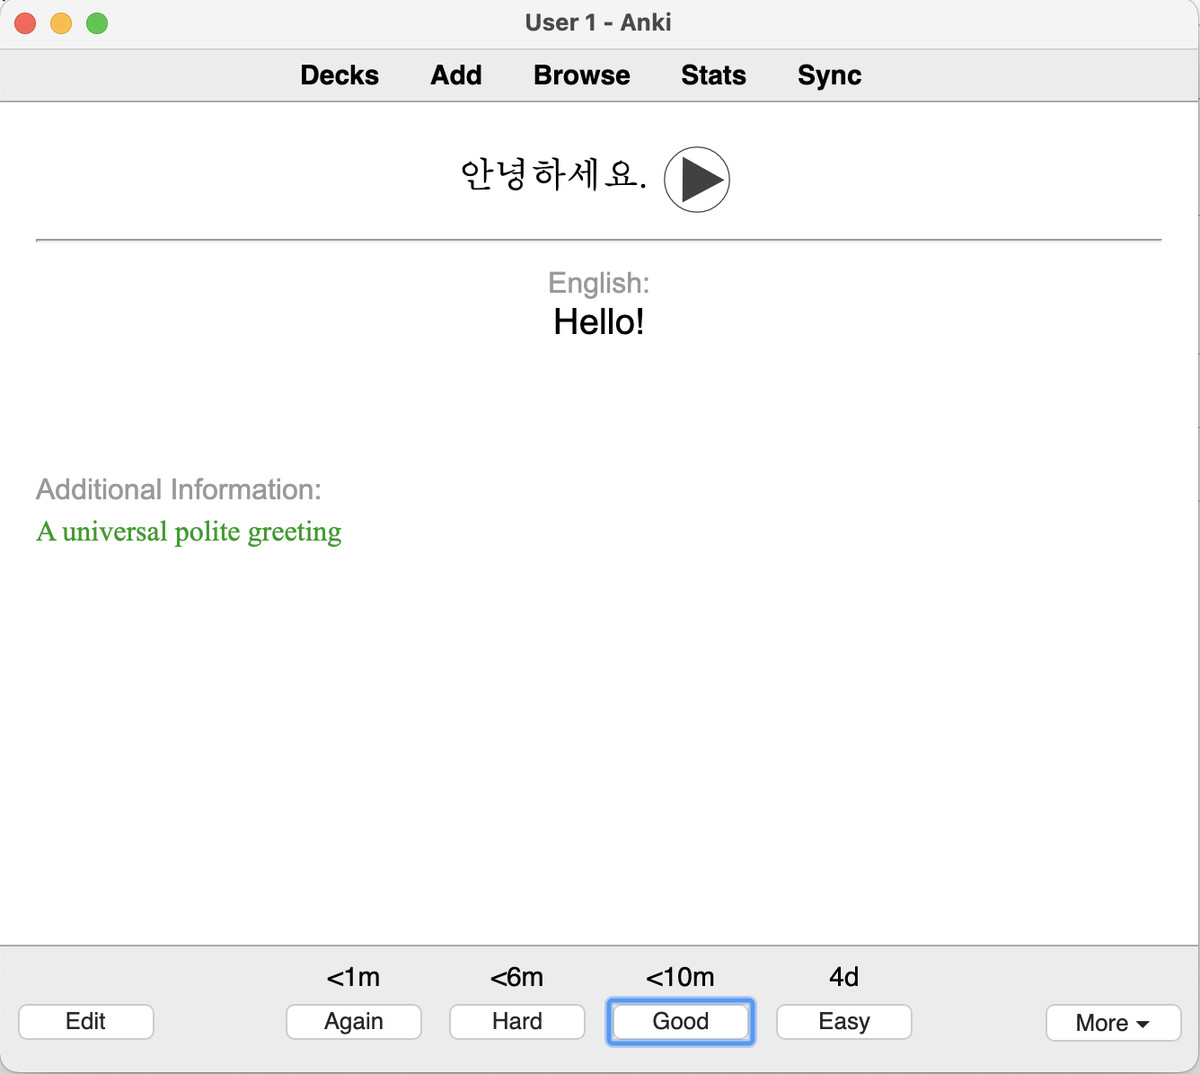 Anki has a clunky interface that really mirrors physical flashcards.